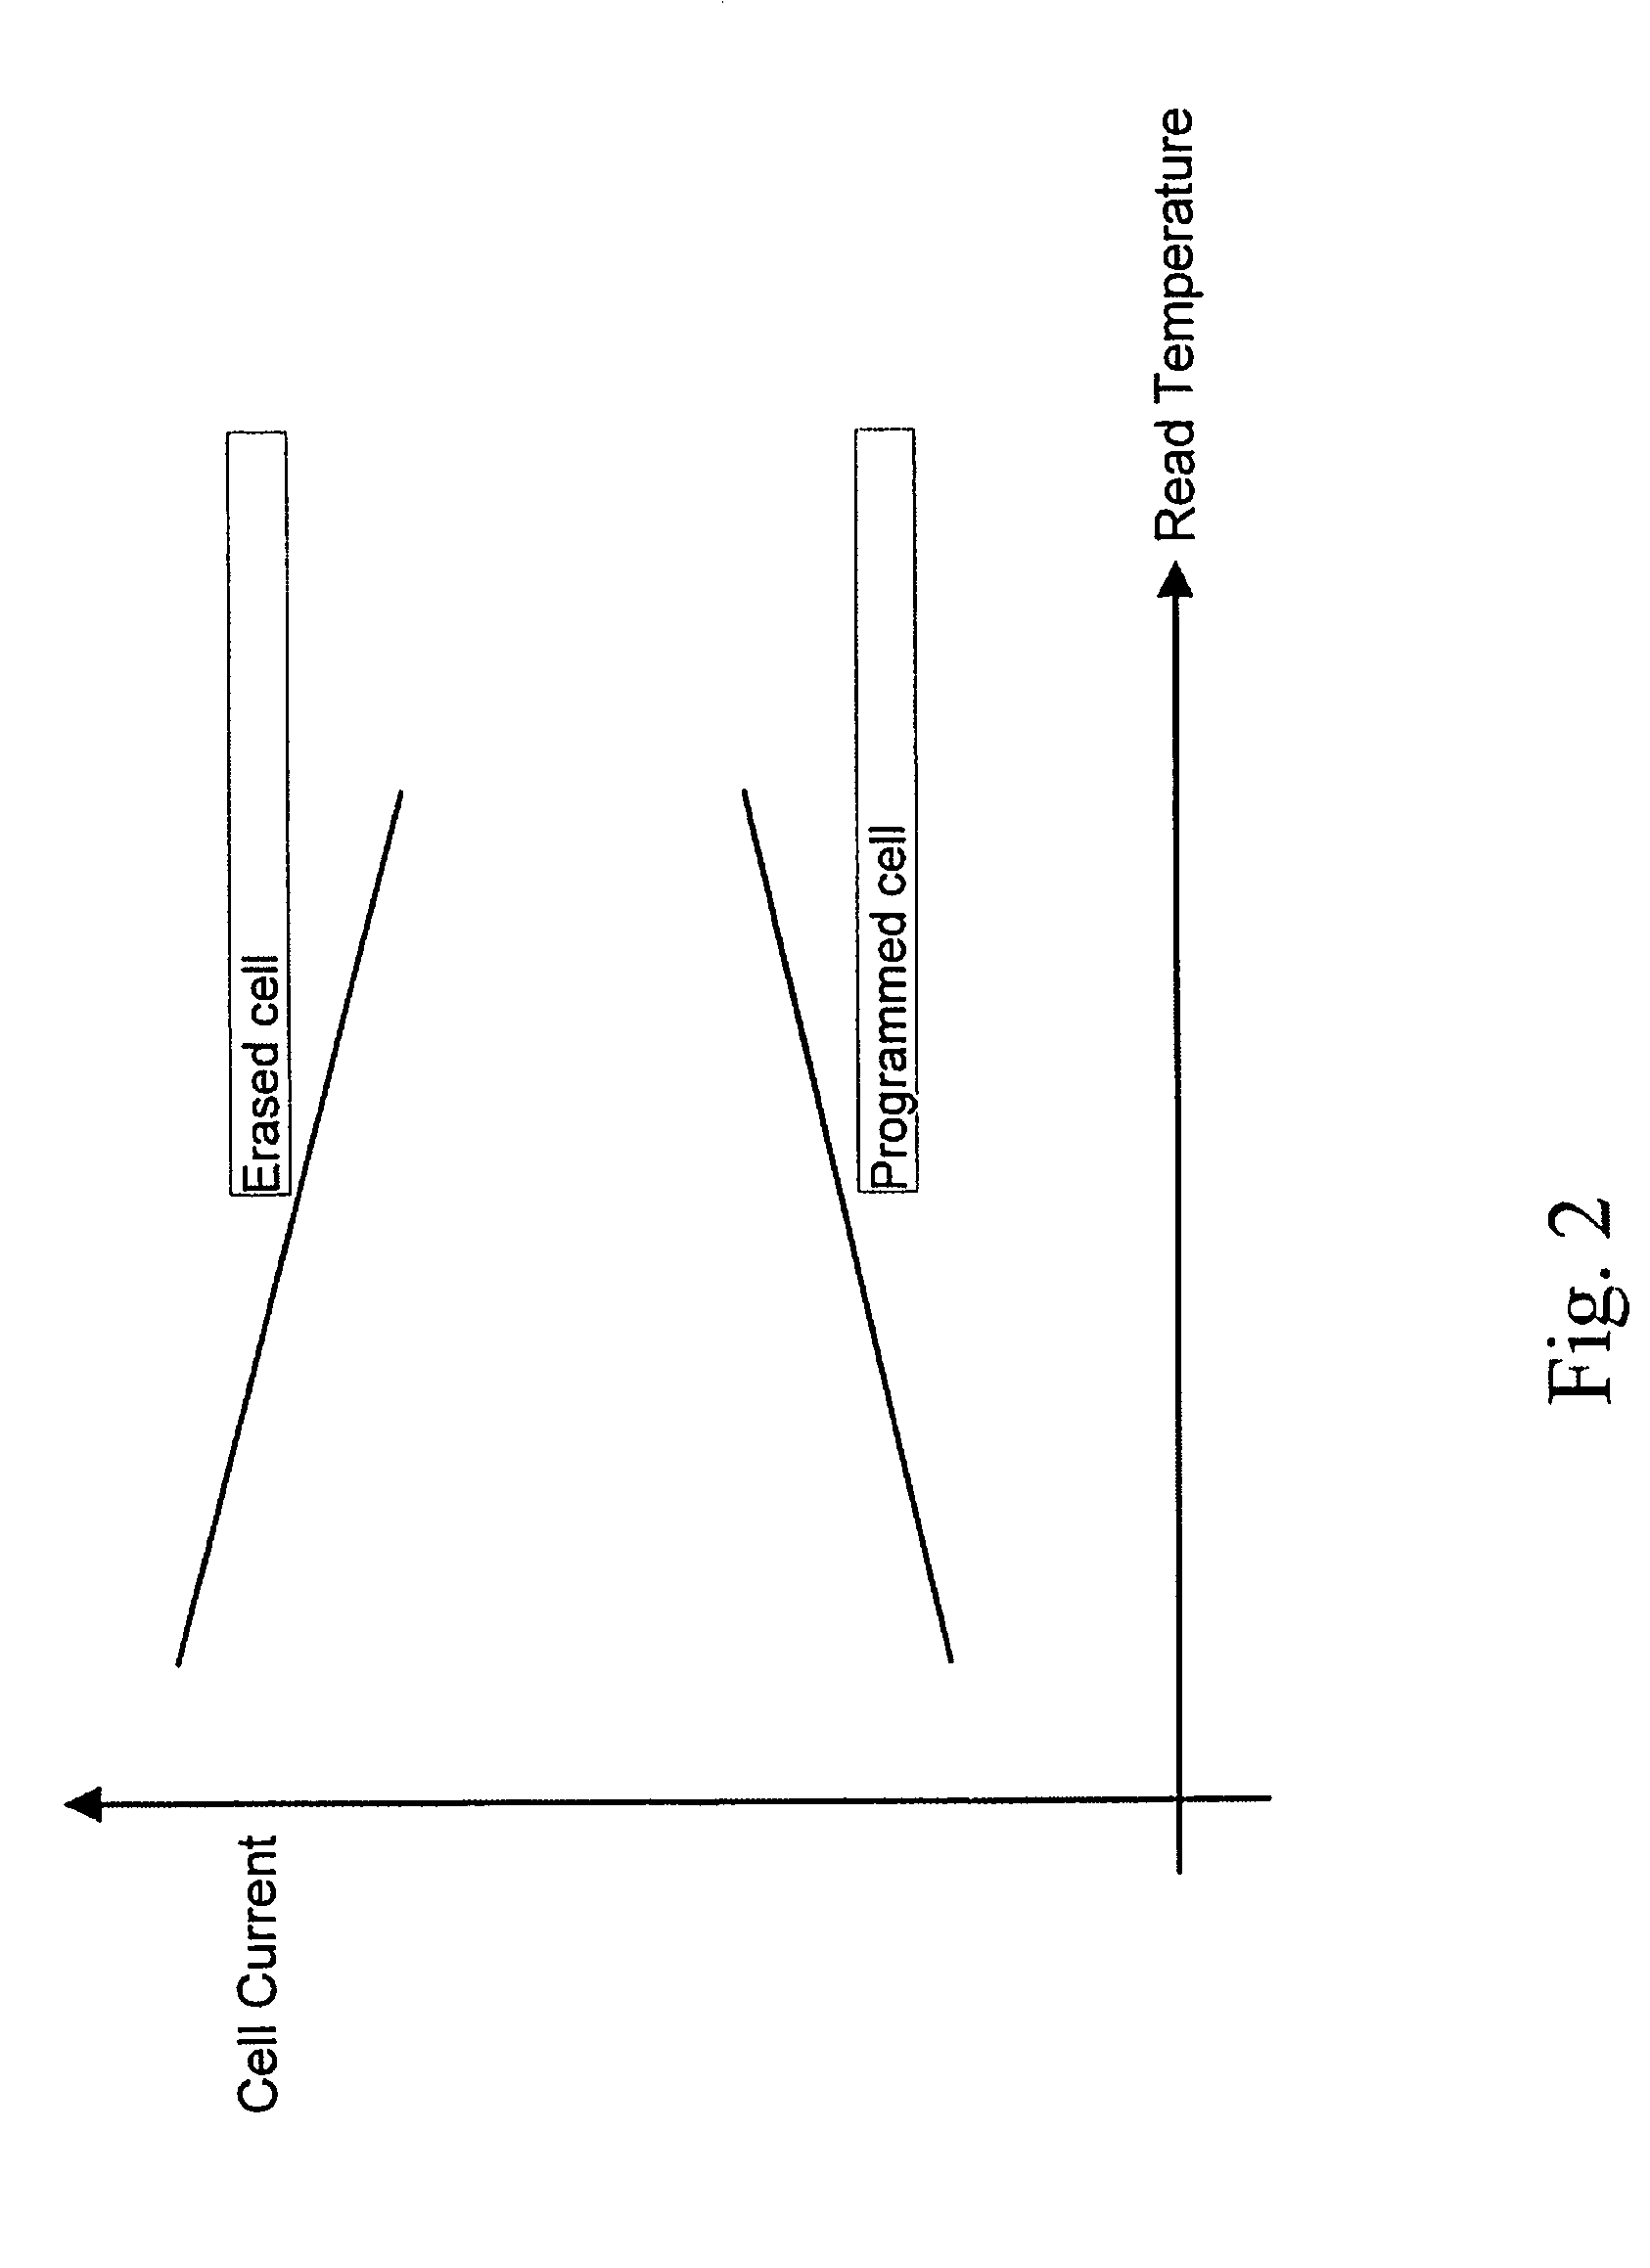 Method circuit and system for compensating for temperature induced margin loss in non-volatile memory cells